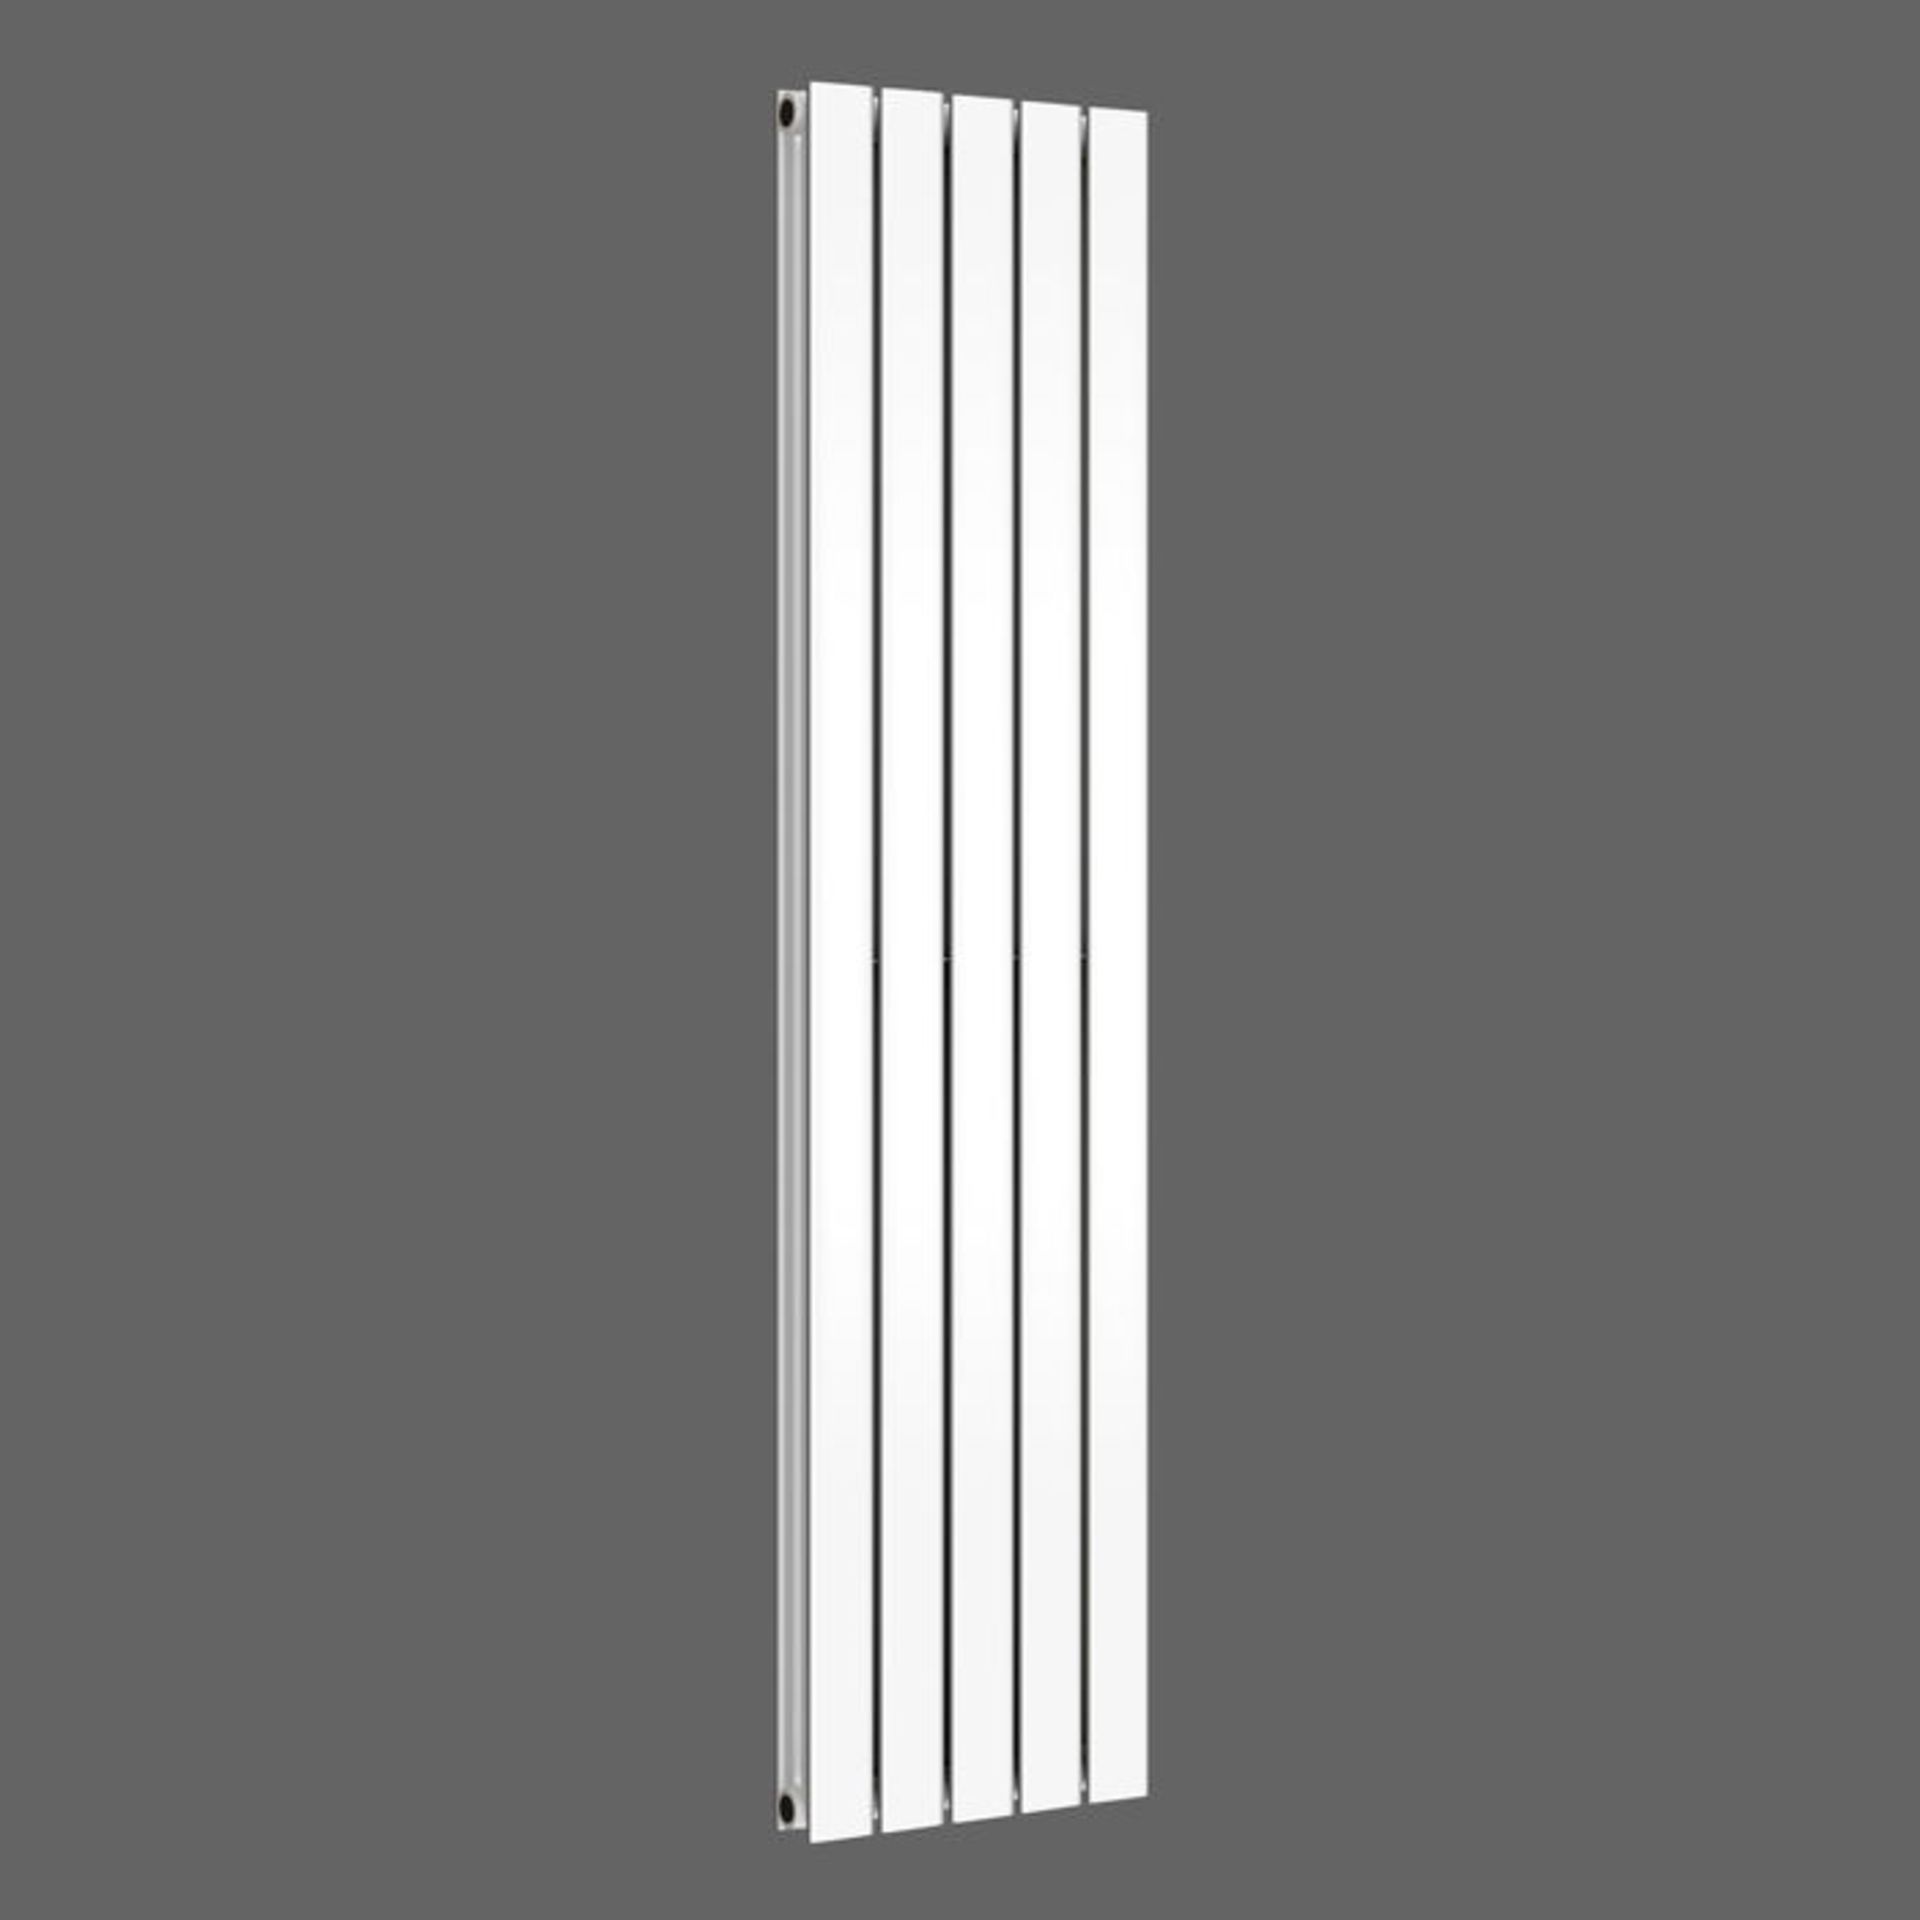 (P180) 1600x376mm Gloss White Double Flat Panel Vertical Radiator. RRP £474.99. We love this - Image 3 of 3